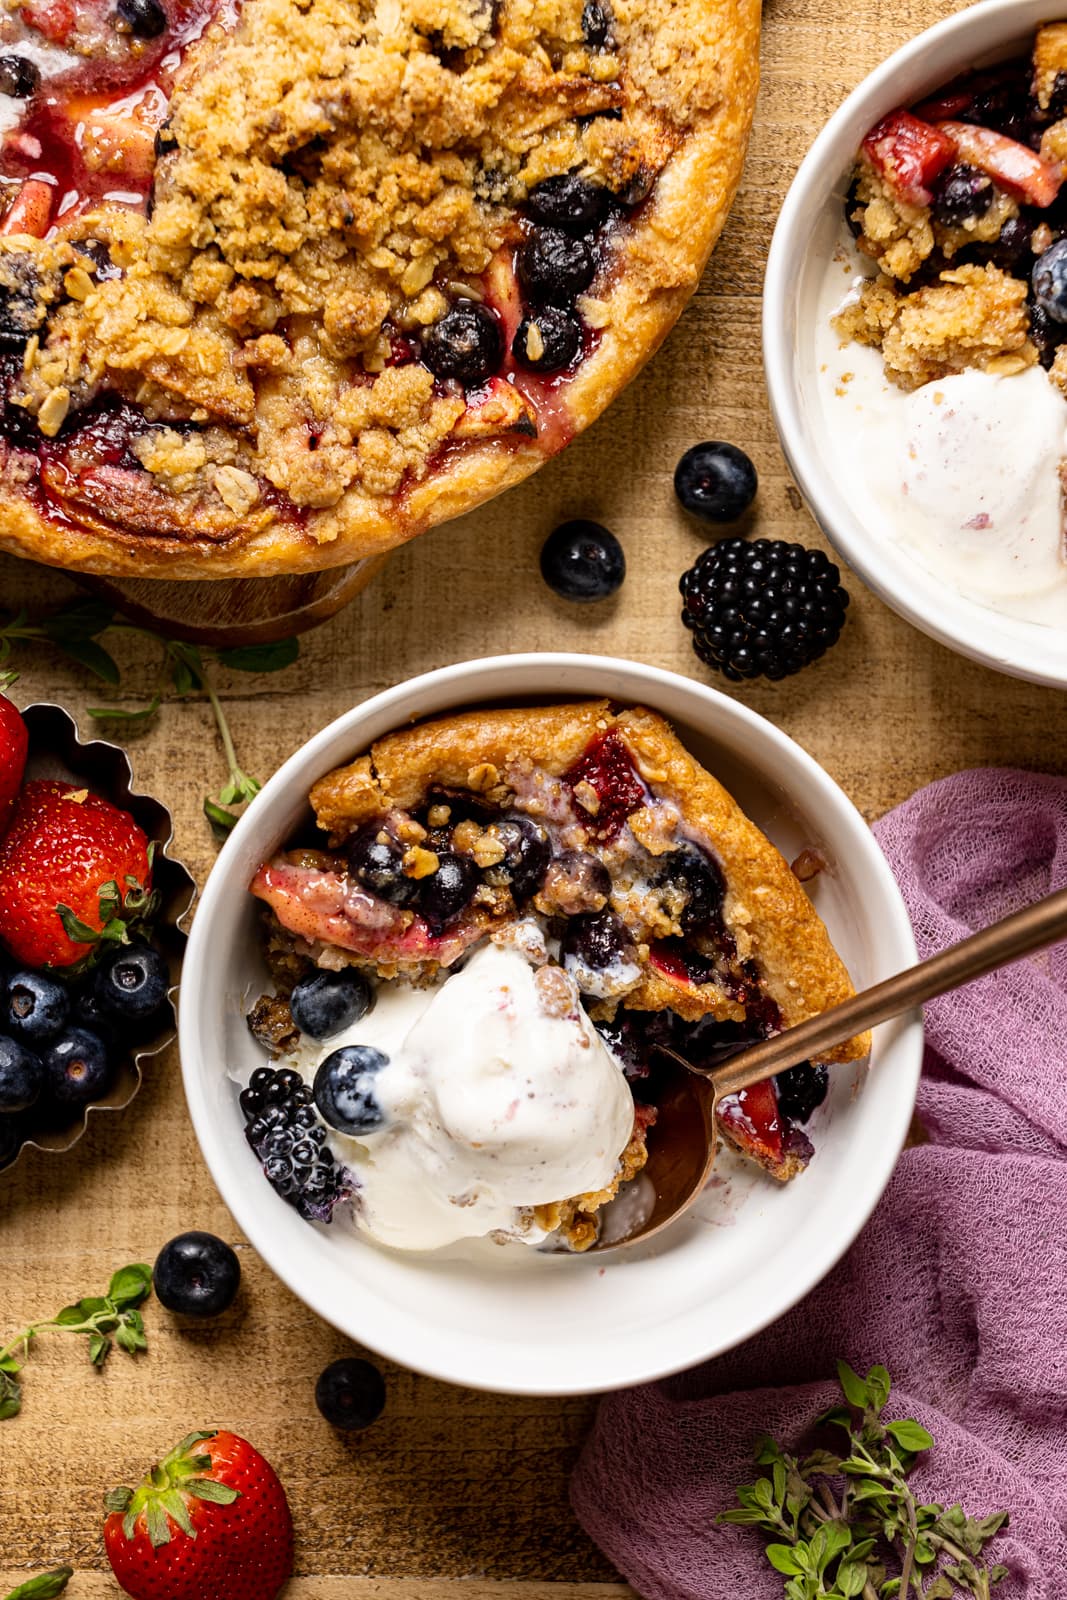 Pie slice in a white bowl on a brown wood table with a scoop of ice cream and berries.